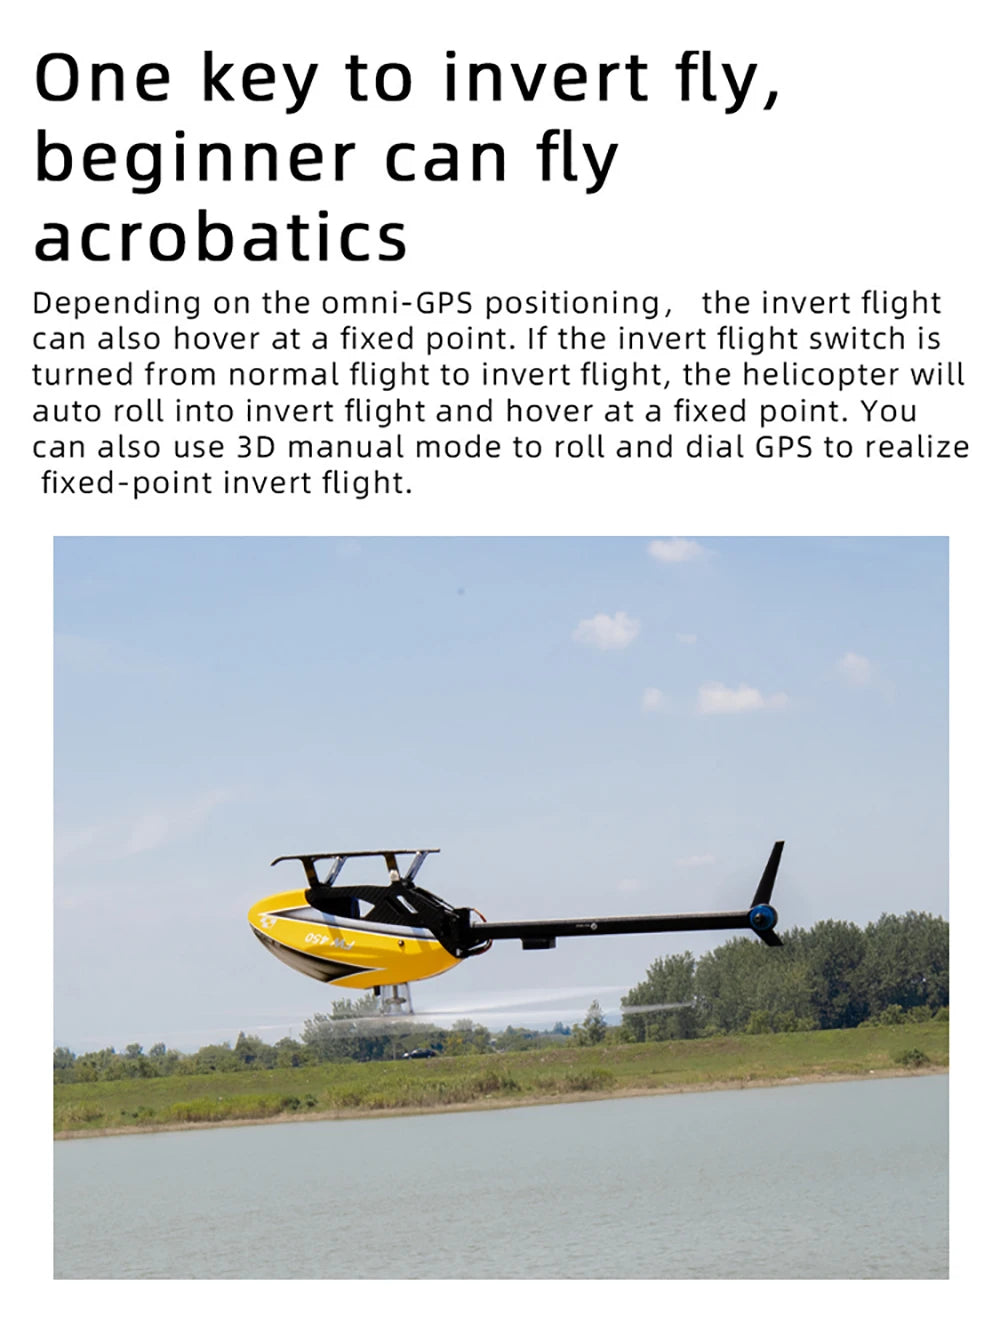 Fly Wing FW450L V2.5 RC Helicopters, Depending on the omni-GPS positioning, the invert flight can also hover at